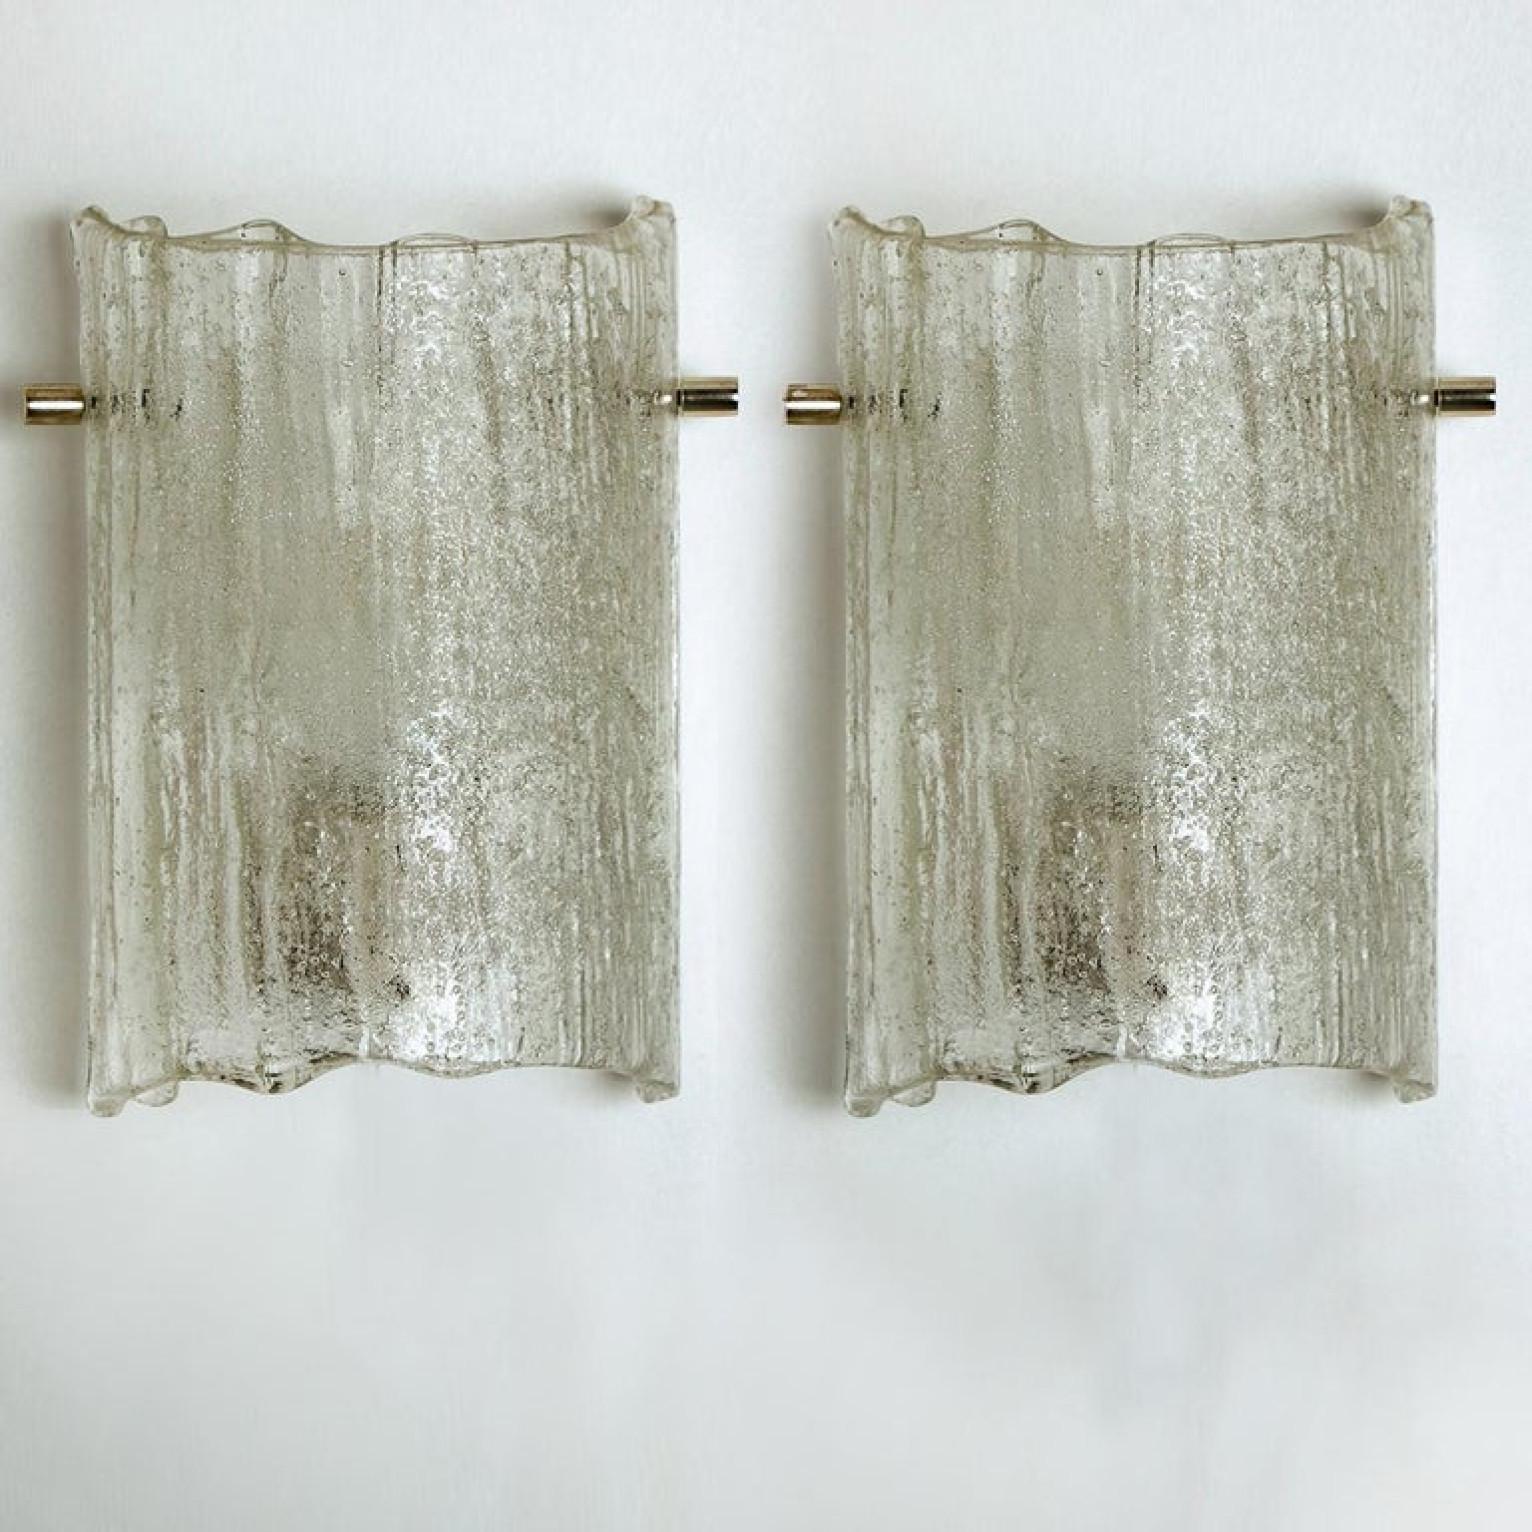 1 of the 5 pairs Massive Glass Wall Light Fixtures by J.T. Kalmar, 1960 For Sale 4